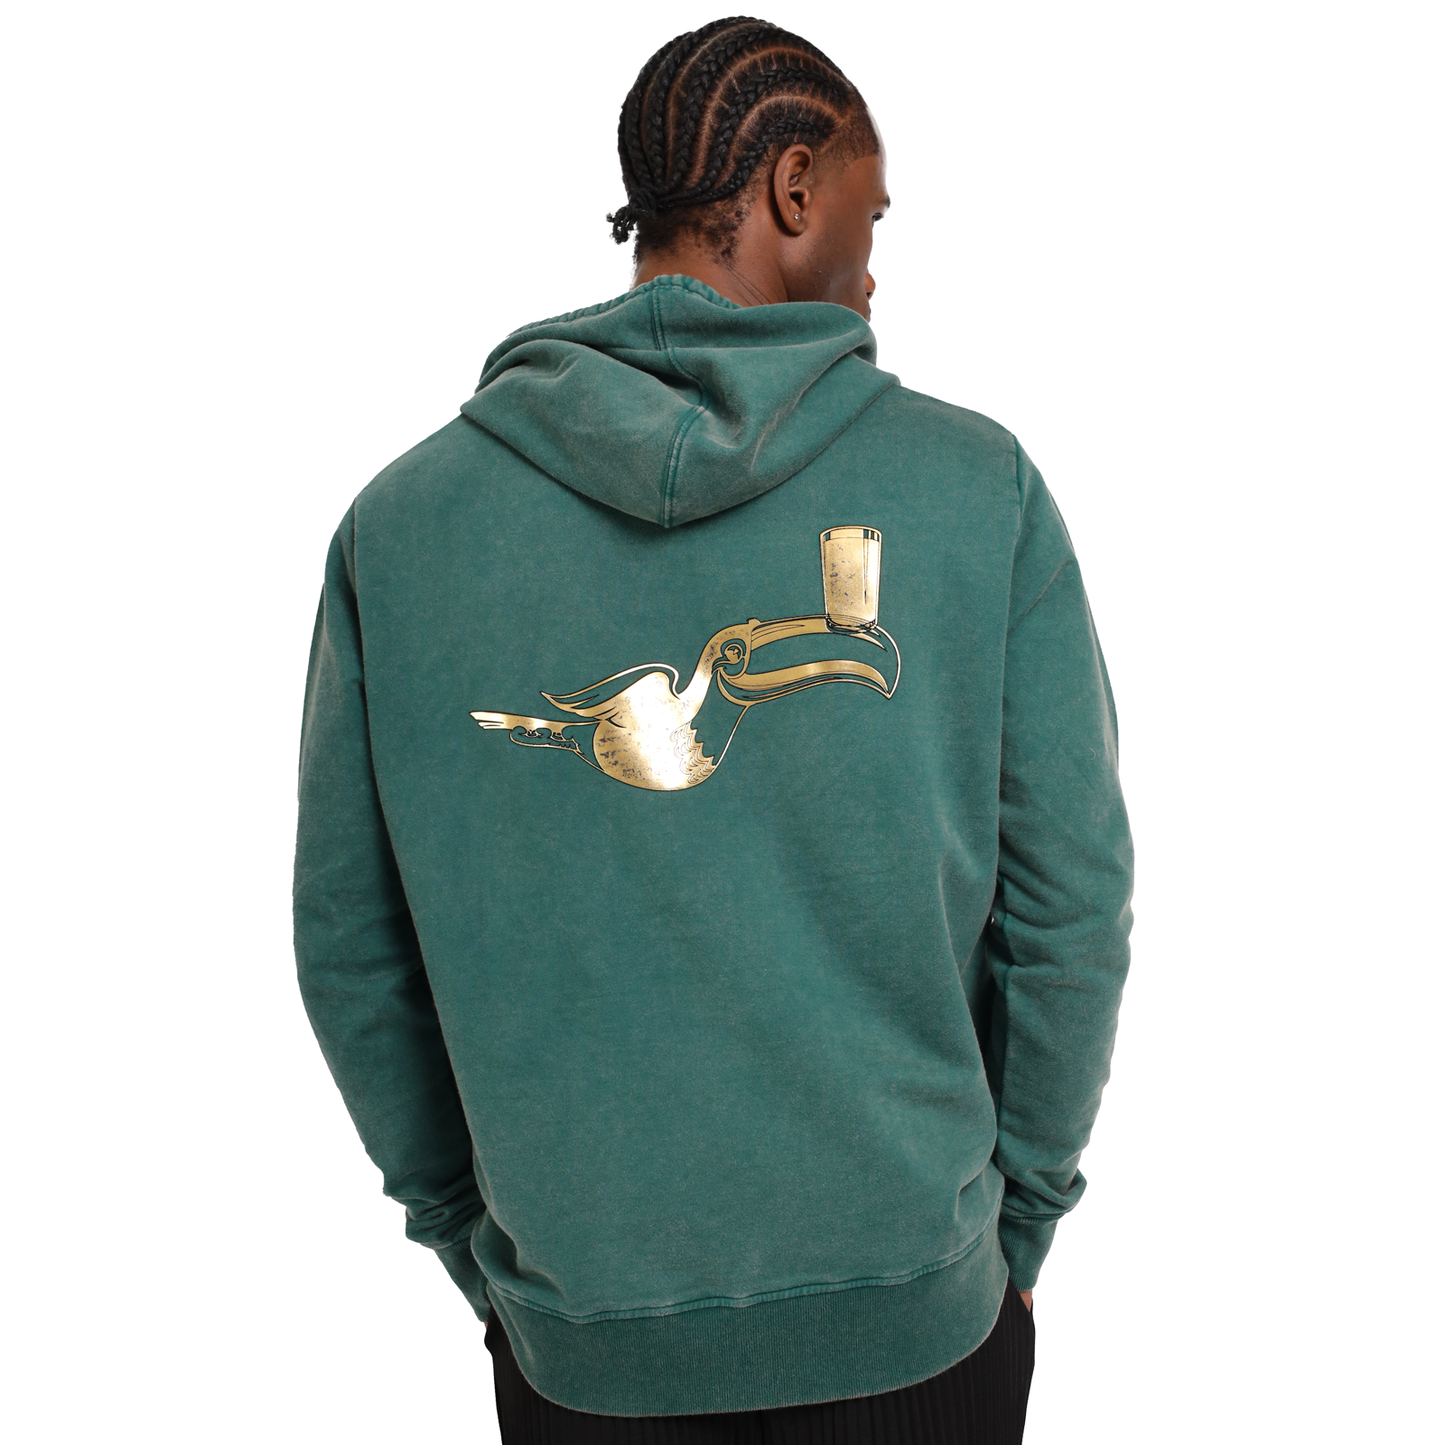 The back of a man wearing a Guinness Forest Green & Gold Toucan Hoodie made from eco-friendly fabric.